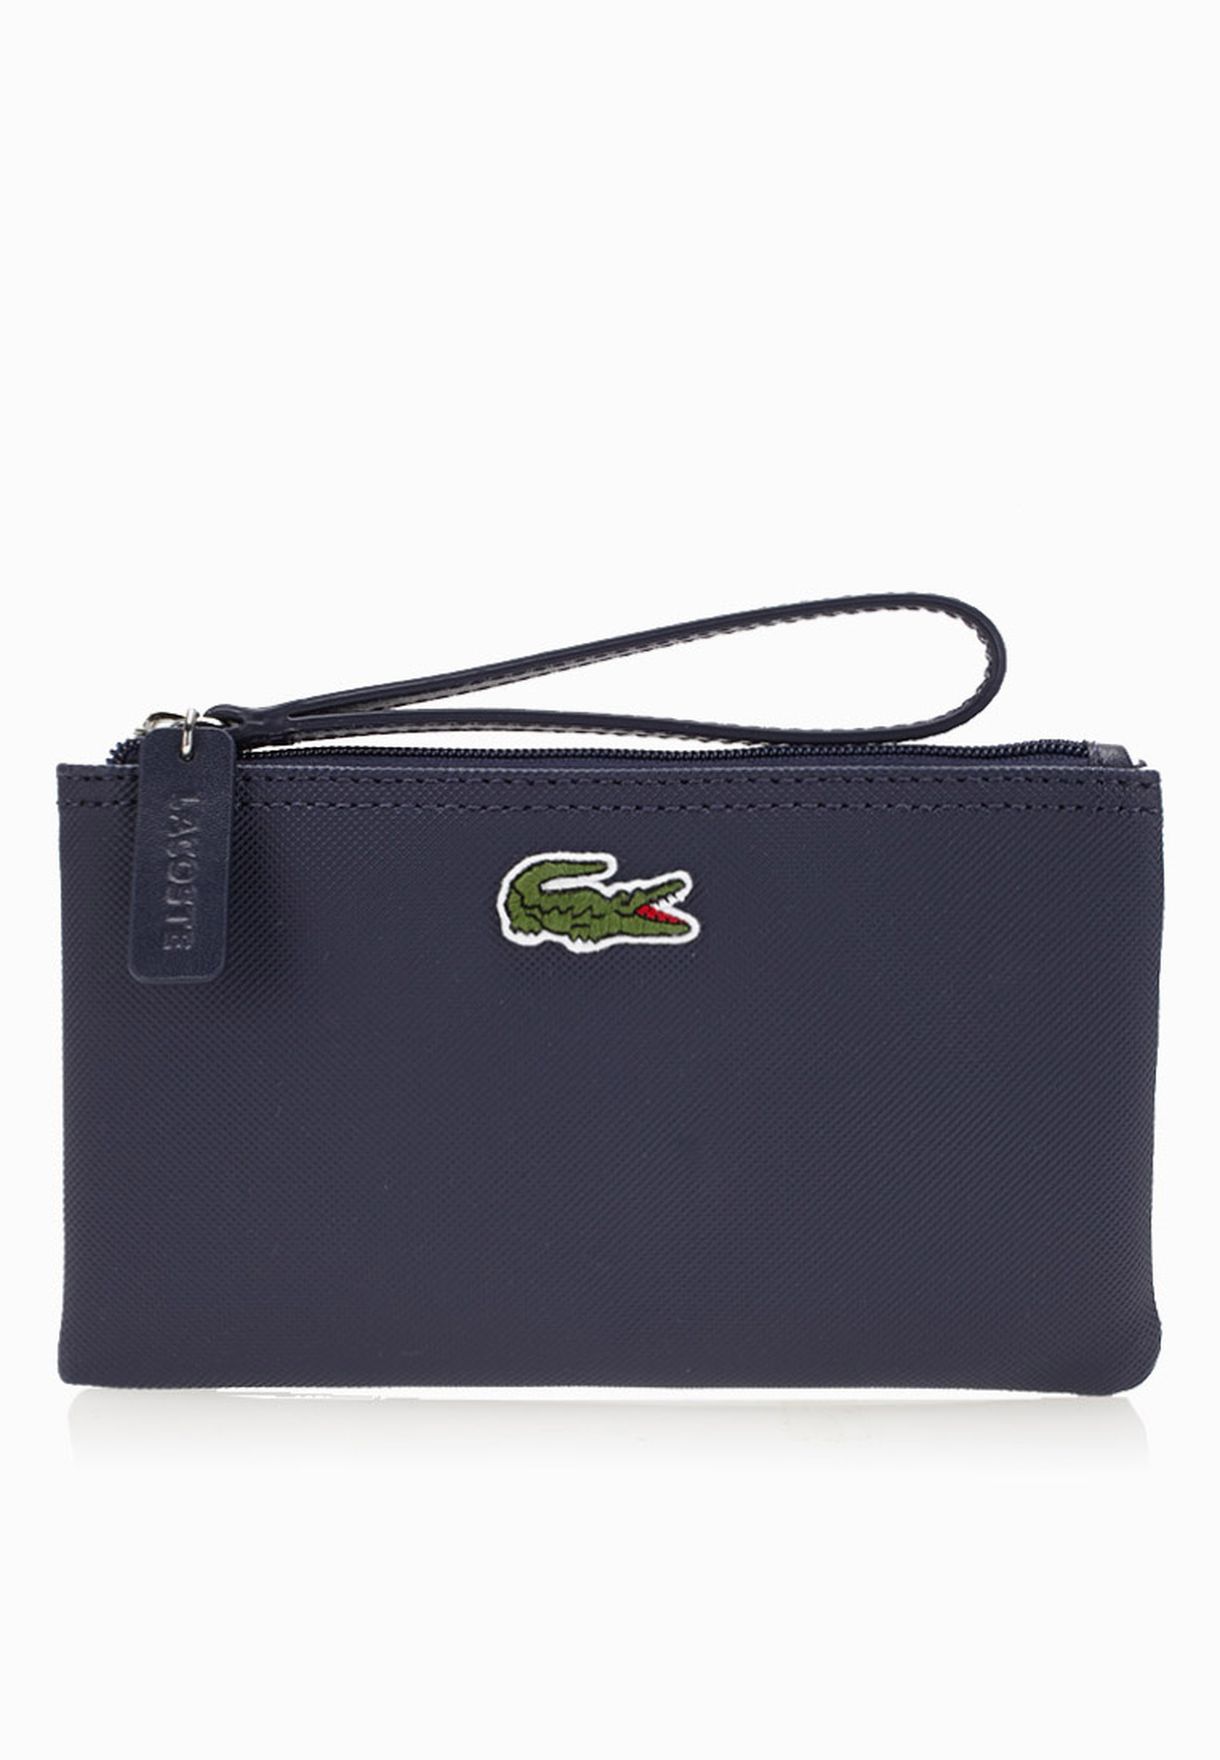 lacoste clutch bag nf0390po